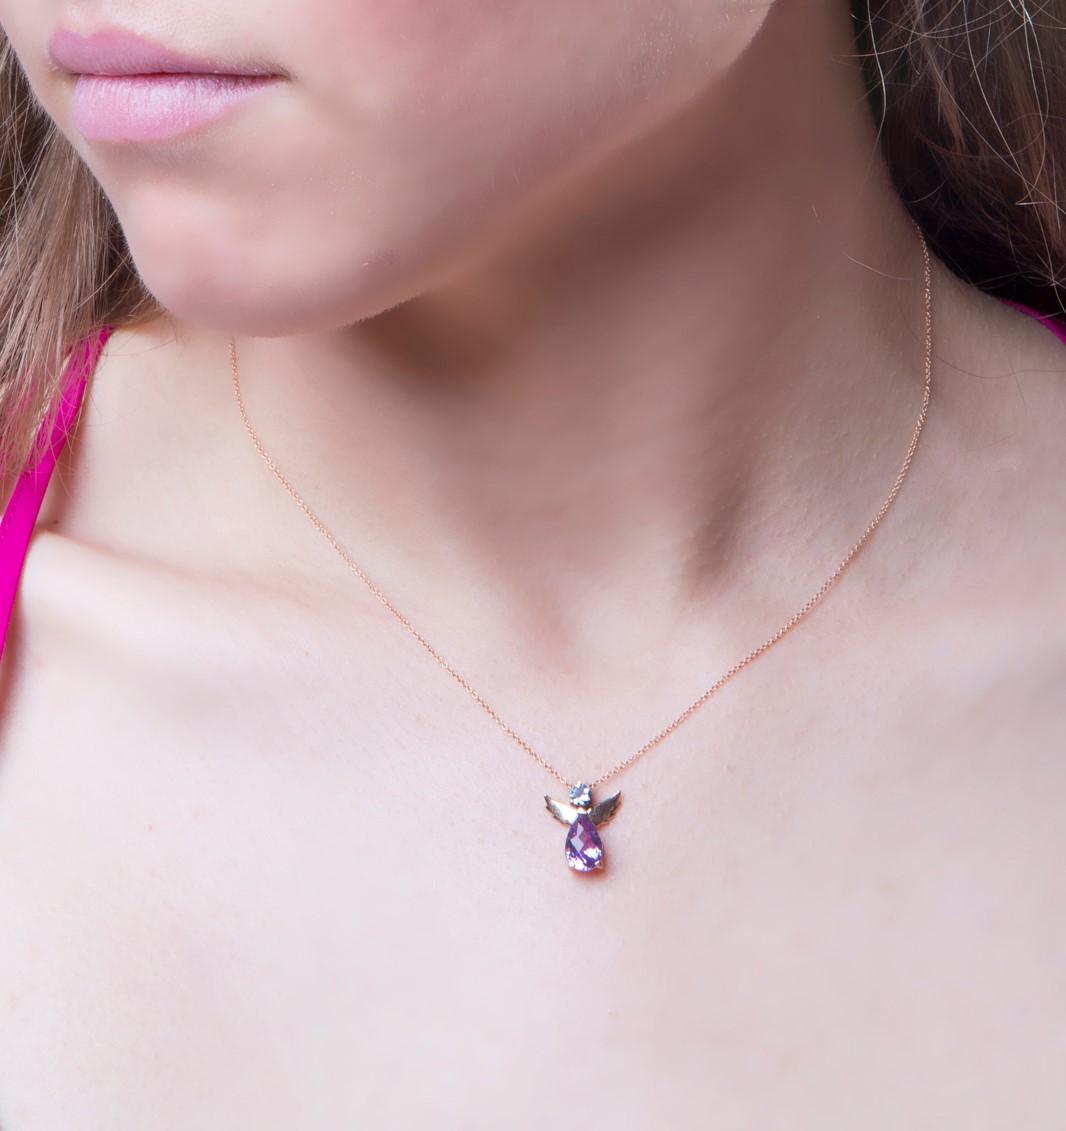 Guardian Angel Pendant Necklace 18kt Rose Gold with Blue Round Aquamarine and Purple Pear Amethyst.
The angel is made of 18Kt rose gold, blue aquamarine and purple amethyst. It comes with an 18Kt rose rolo chain, 16 inches long. The pendant necklace